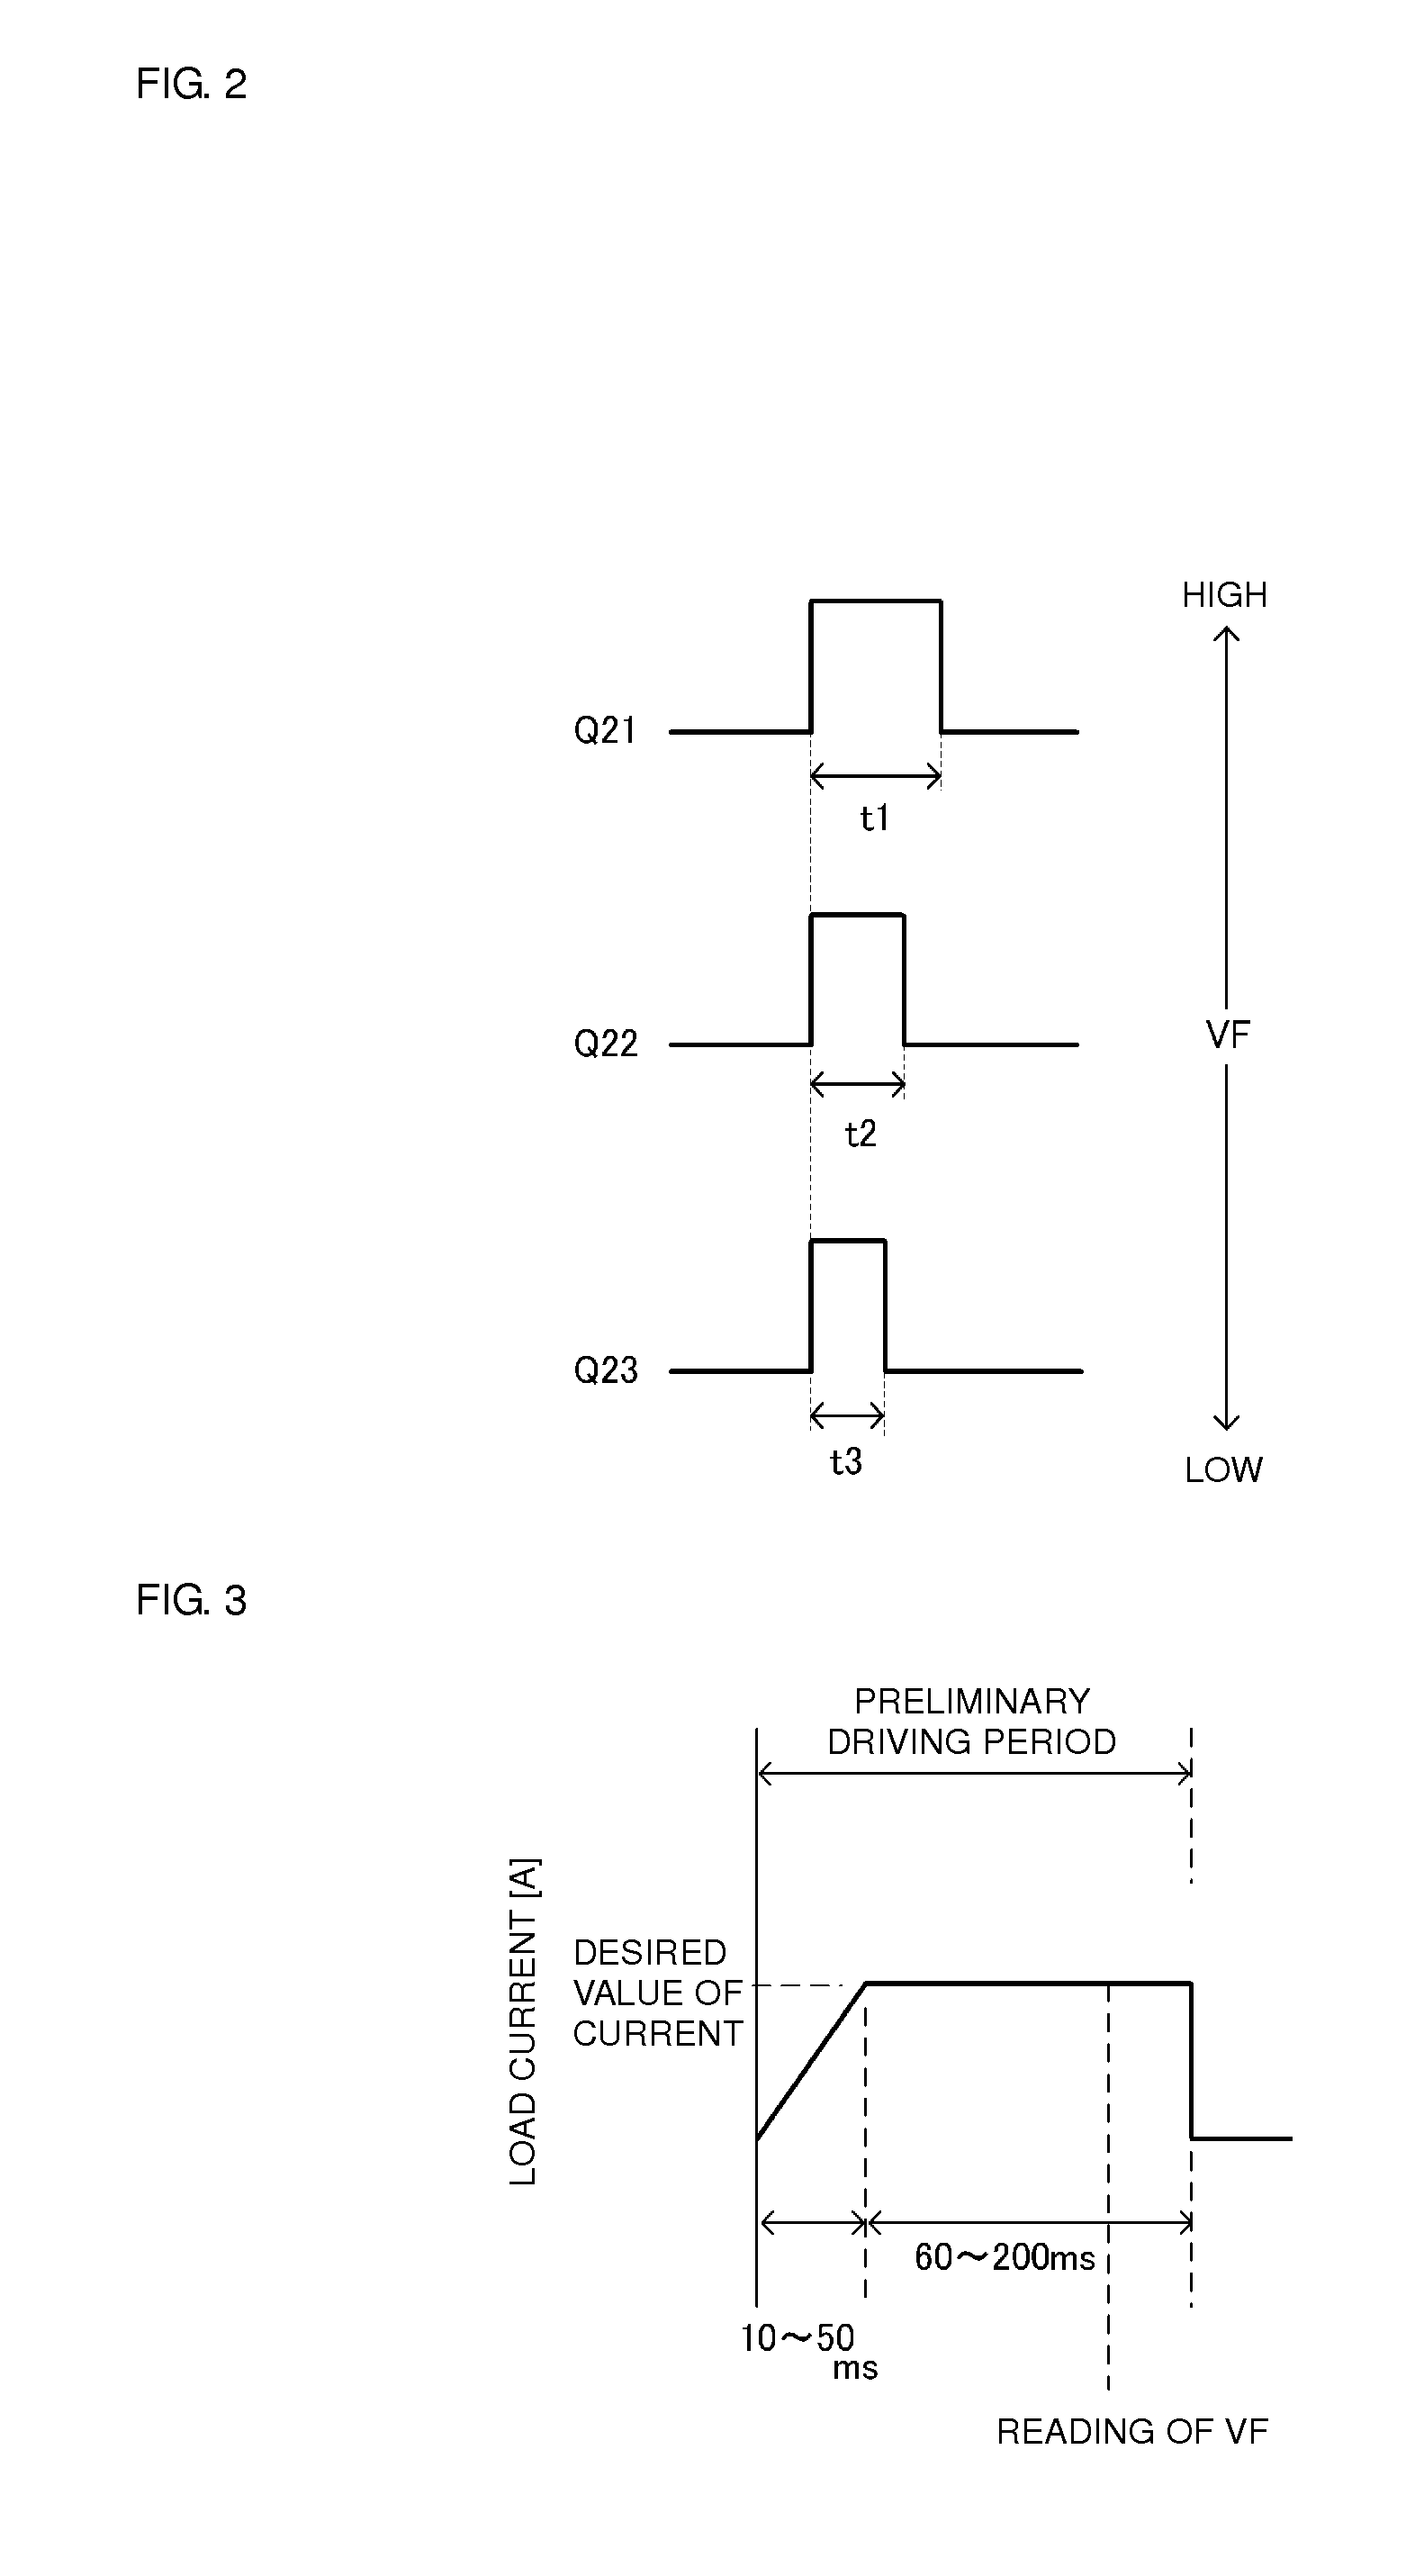 Diode load driving power supply apparatus